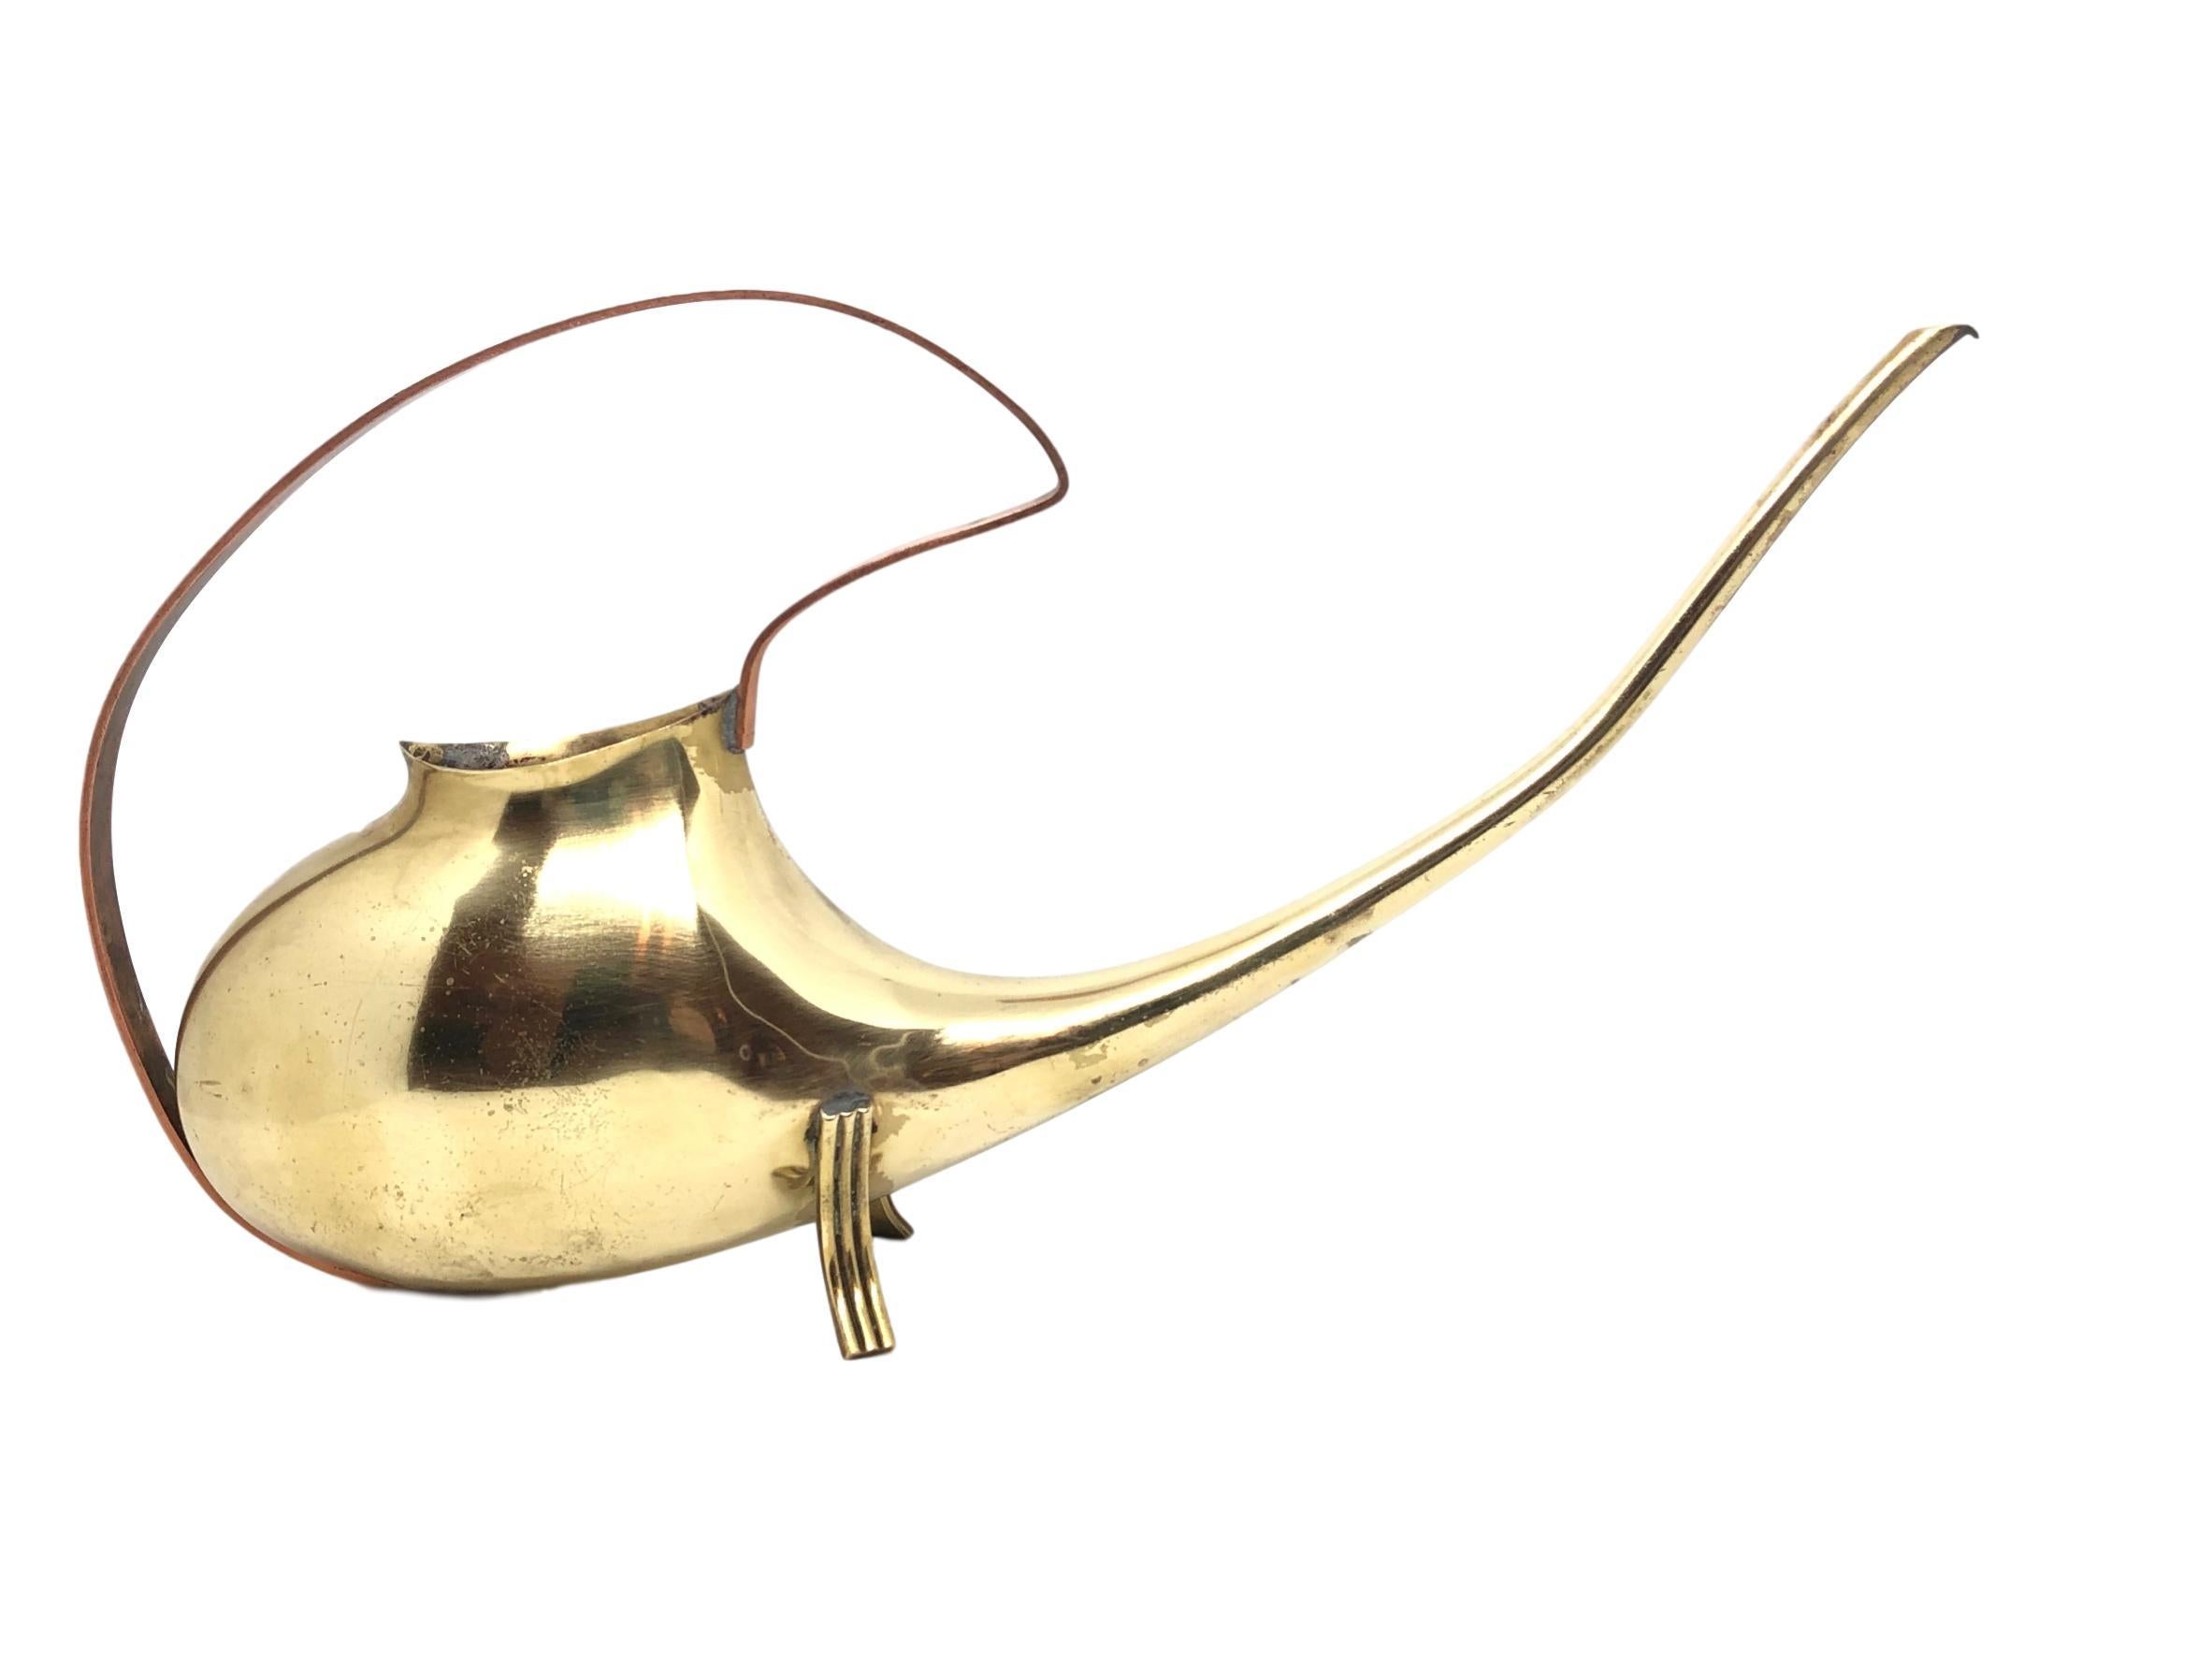 A gorgeous vintage Mid-Century Modern brass and copper watering can with a long spout. Great lines, great original condition with wonderful patina. Has some smaller dents, but this is old-age and gives it a nice authentic look.